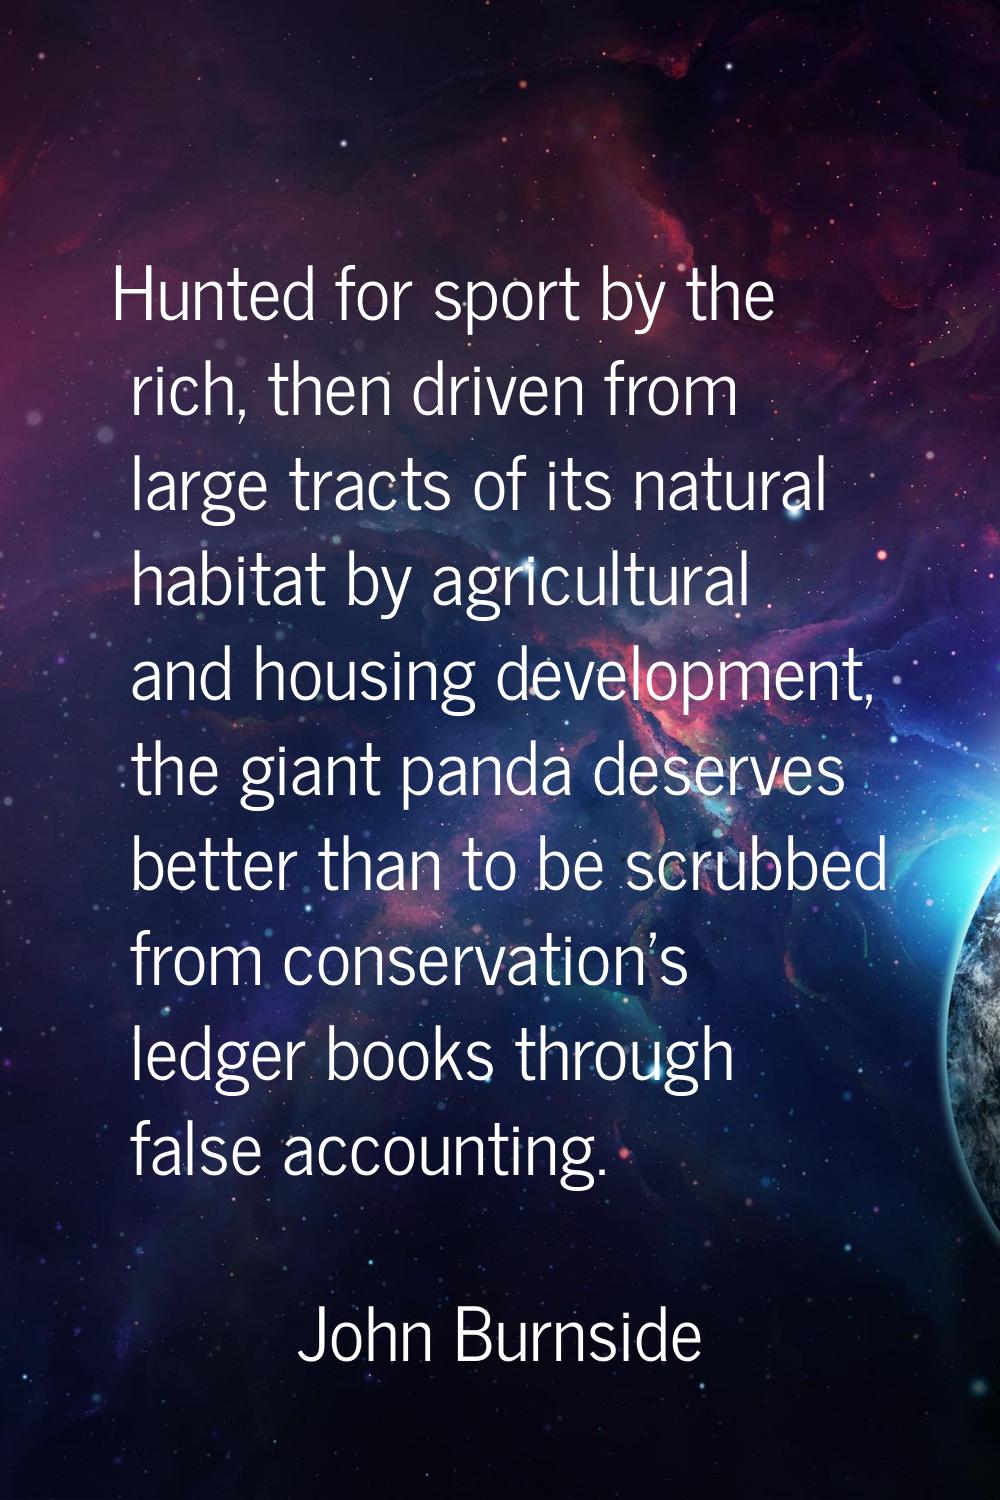 Hunted for sport by the rich, then driven from large tracts of its natural habitat by agricultural 